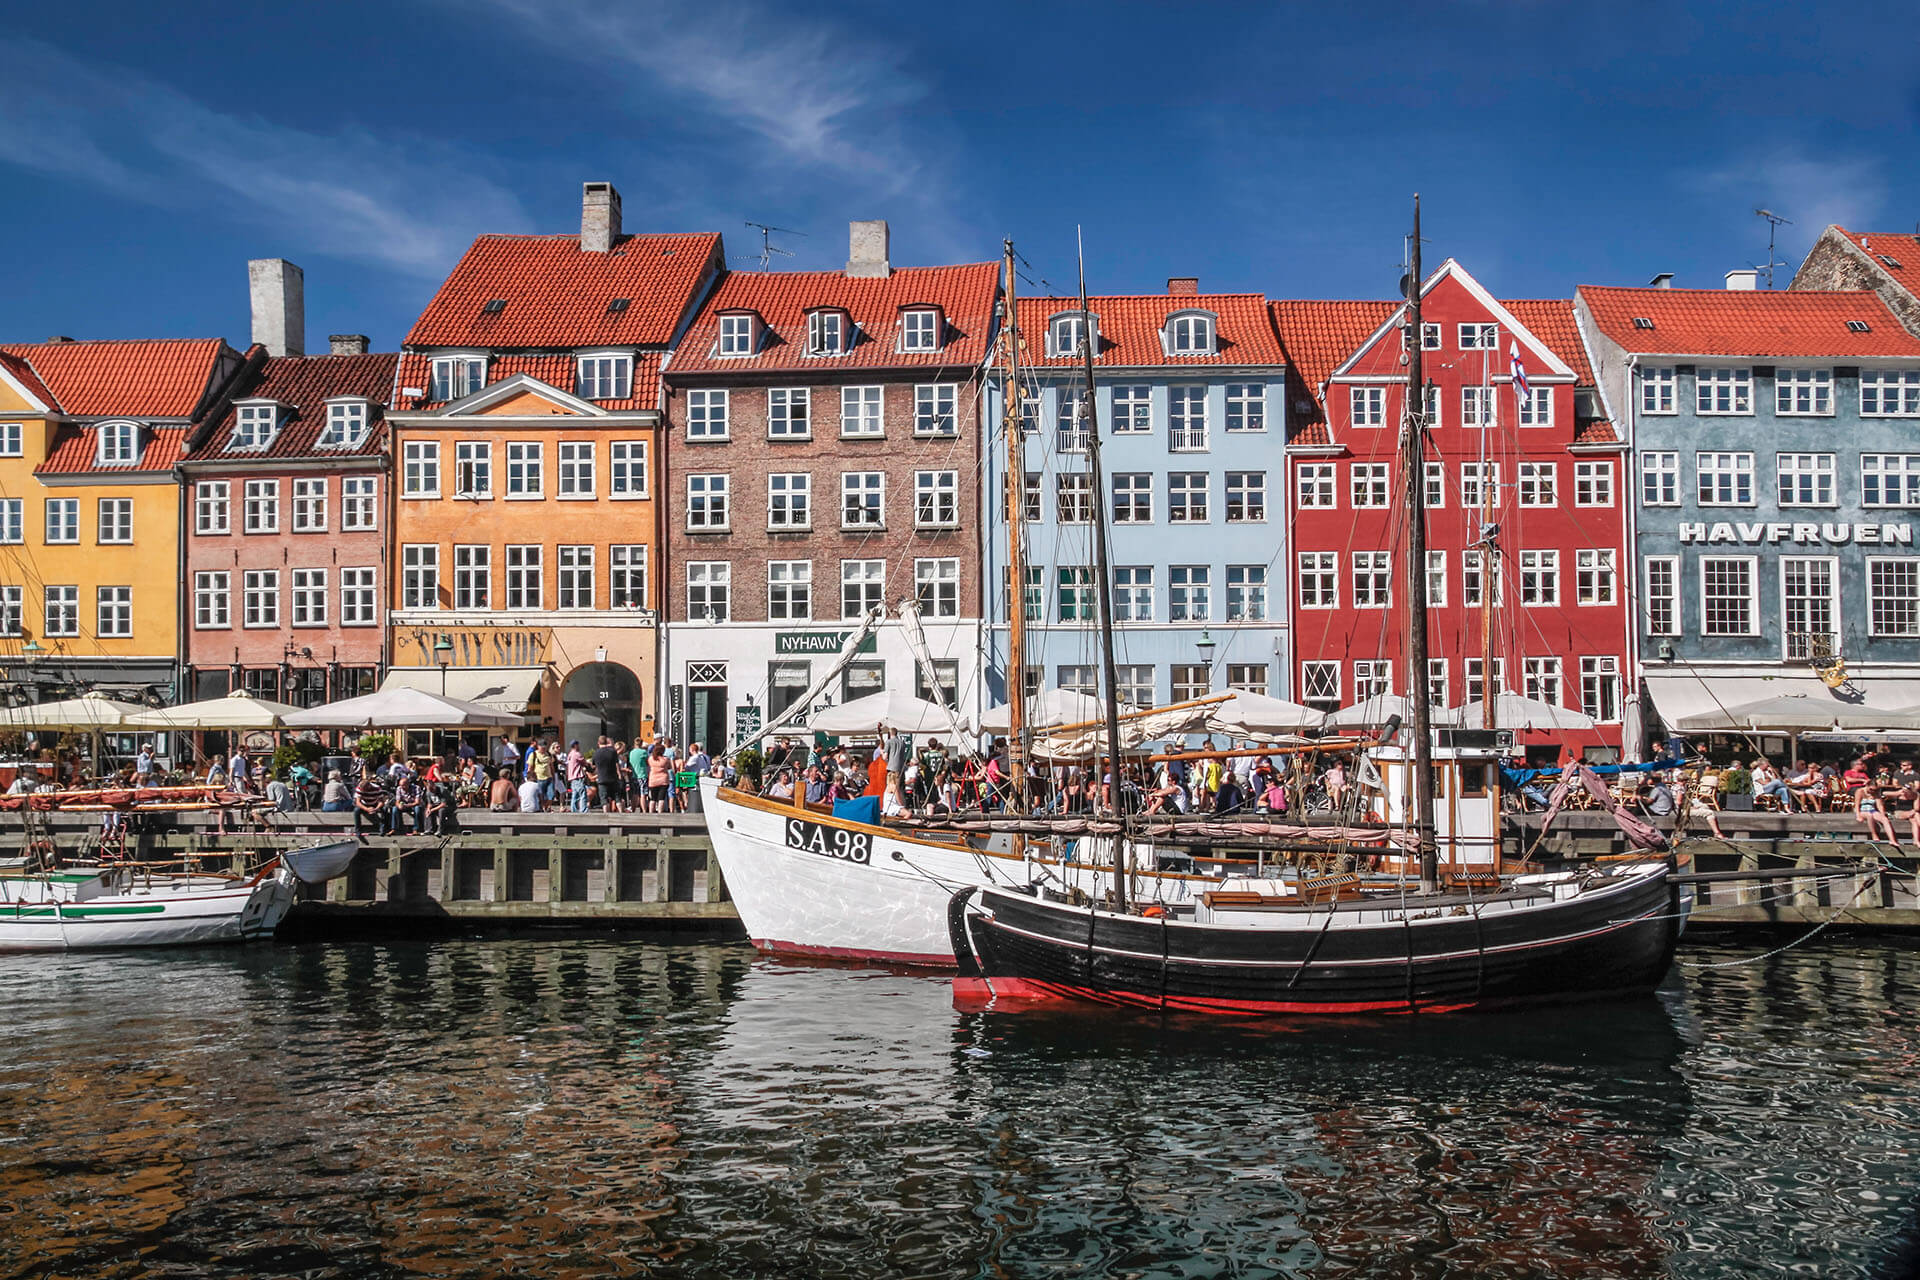 Denmark: New Lists for Higher Education and Skilled Work